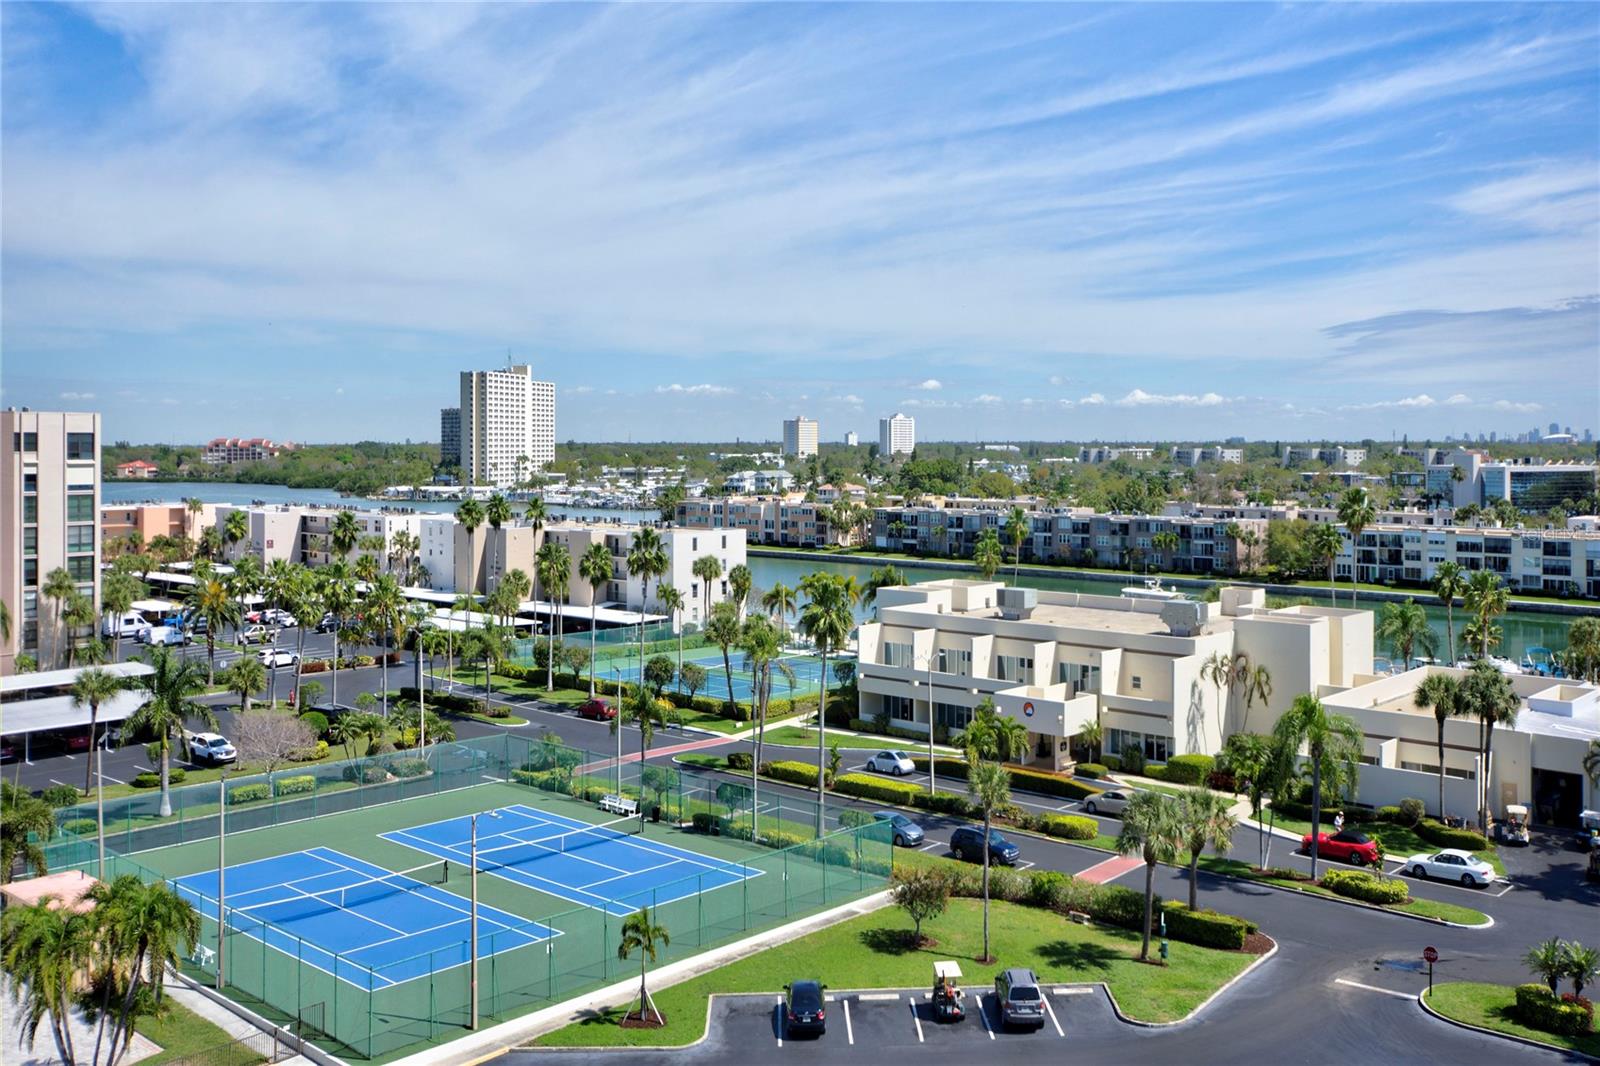 tennis and Pickleball courts